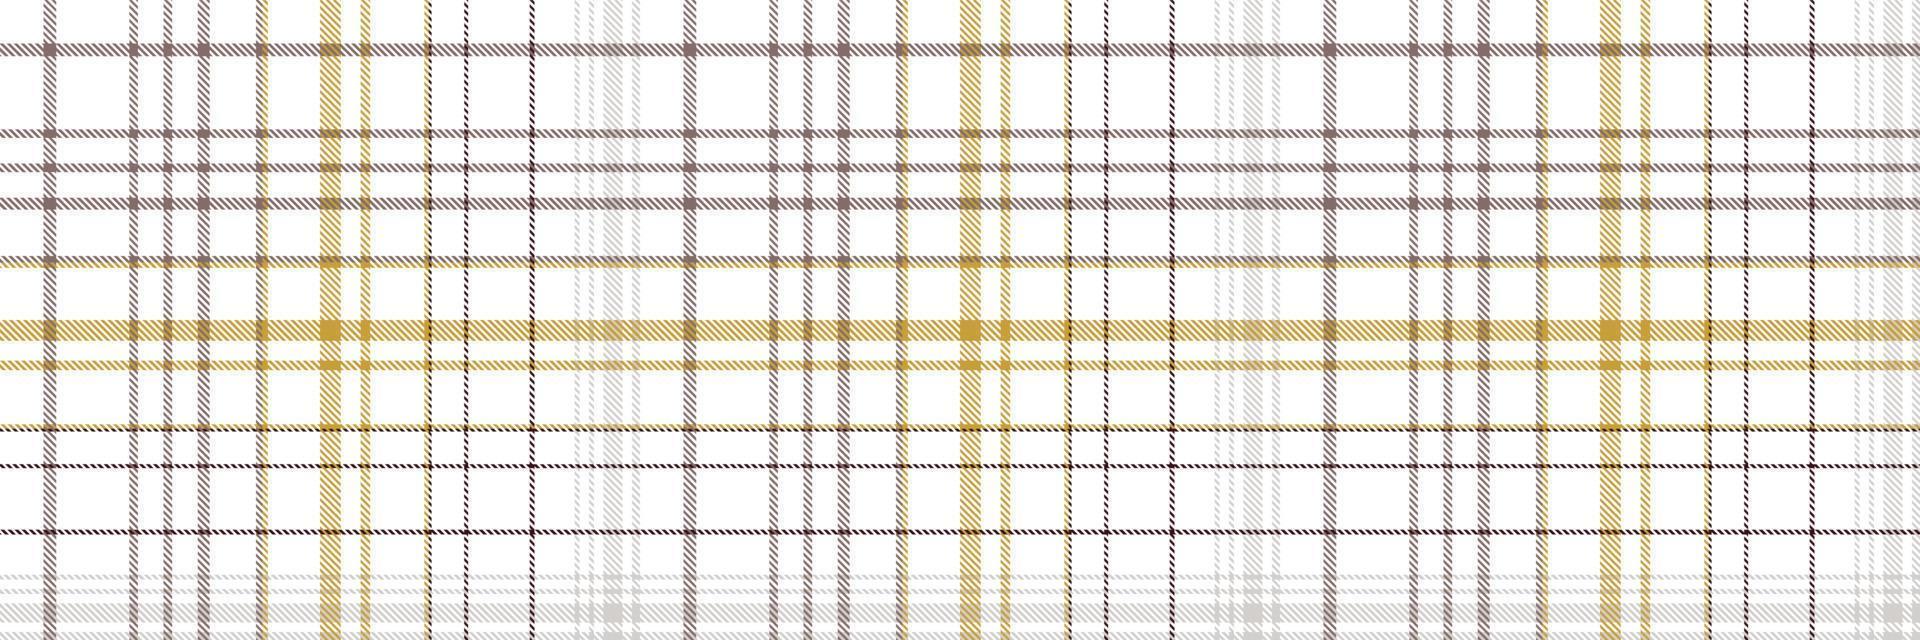 Plaid seamless pattern is a patterned cloth consisting of criss crossed, horizontal and vertical bands in multiple colours.Seamless tartan for  scarf,pyjamas,blanket,duvet,kilt large shawl. vector